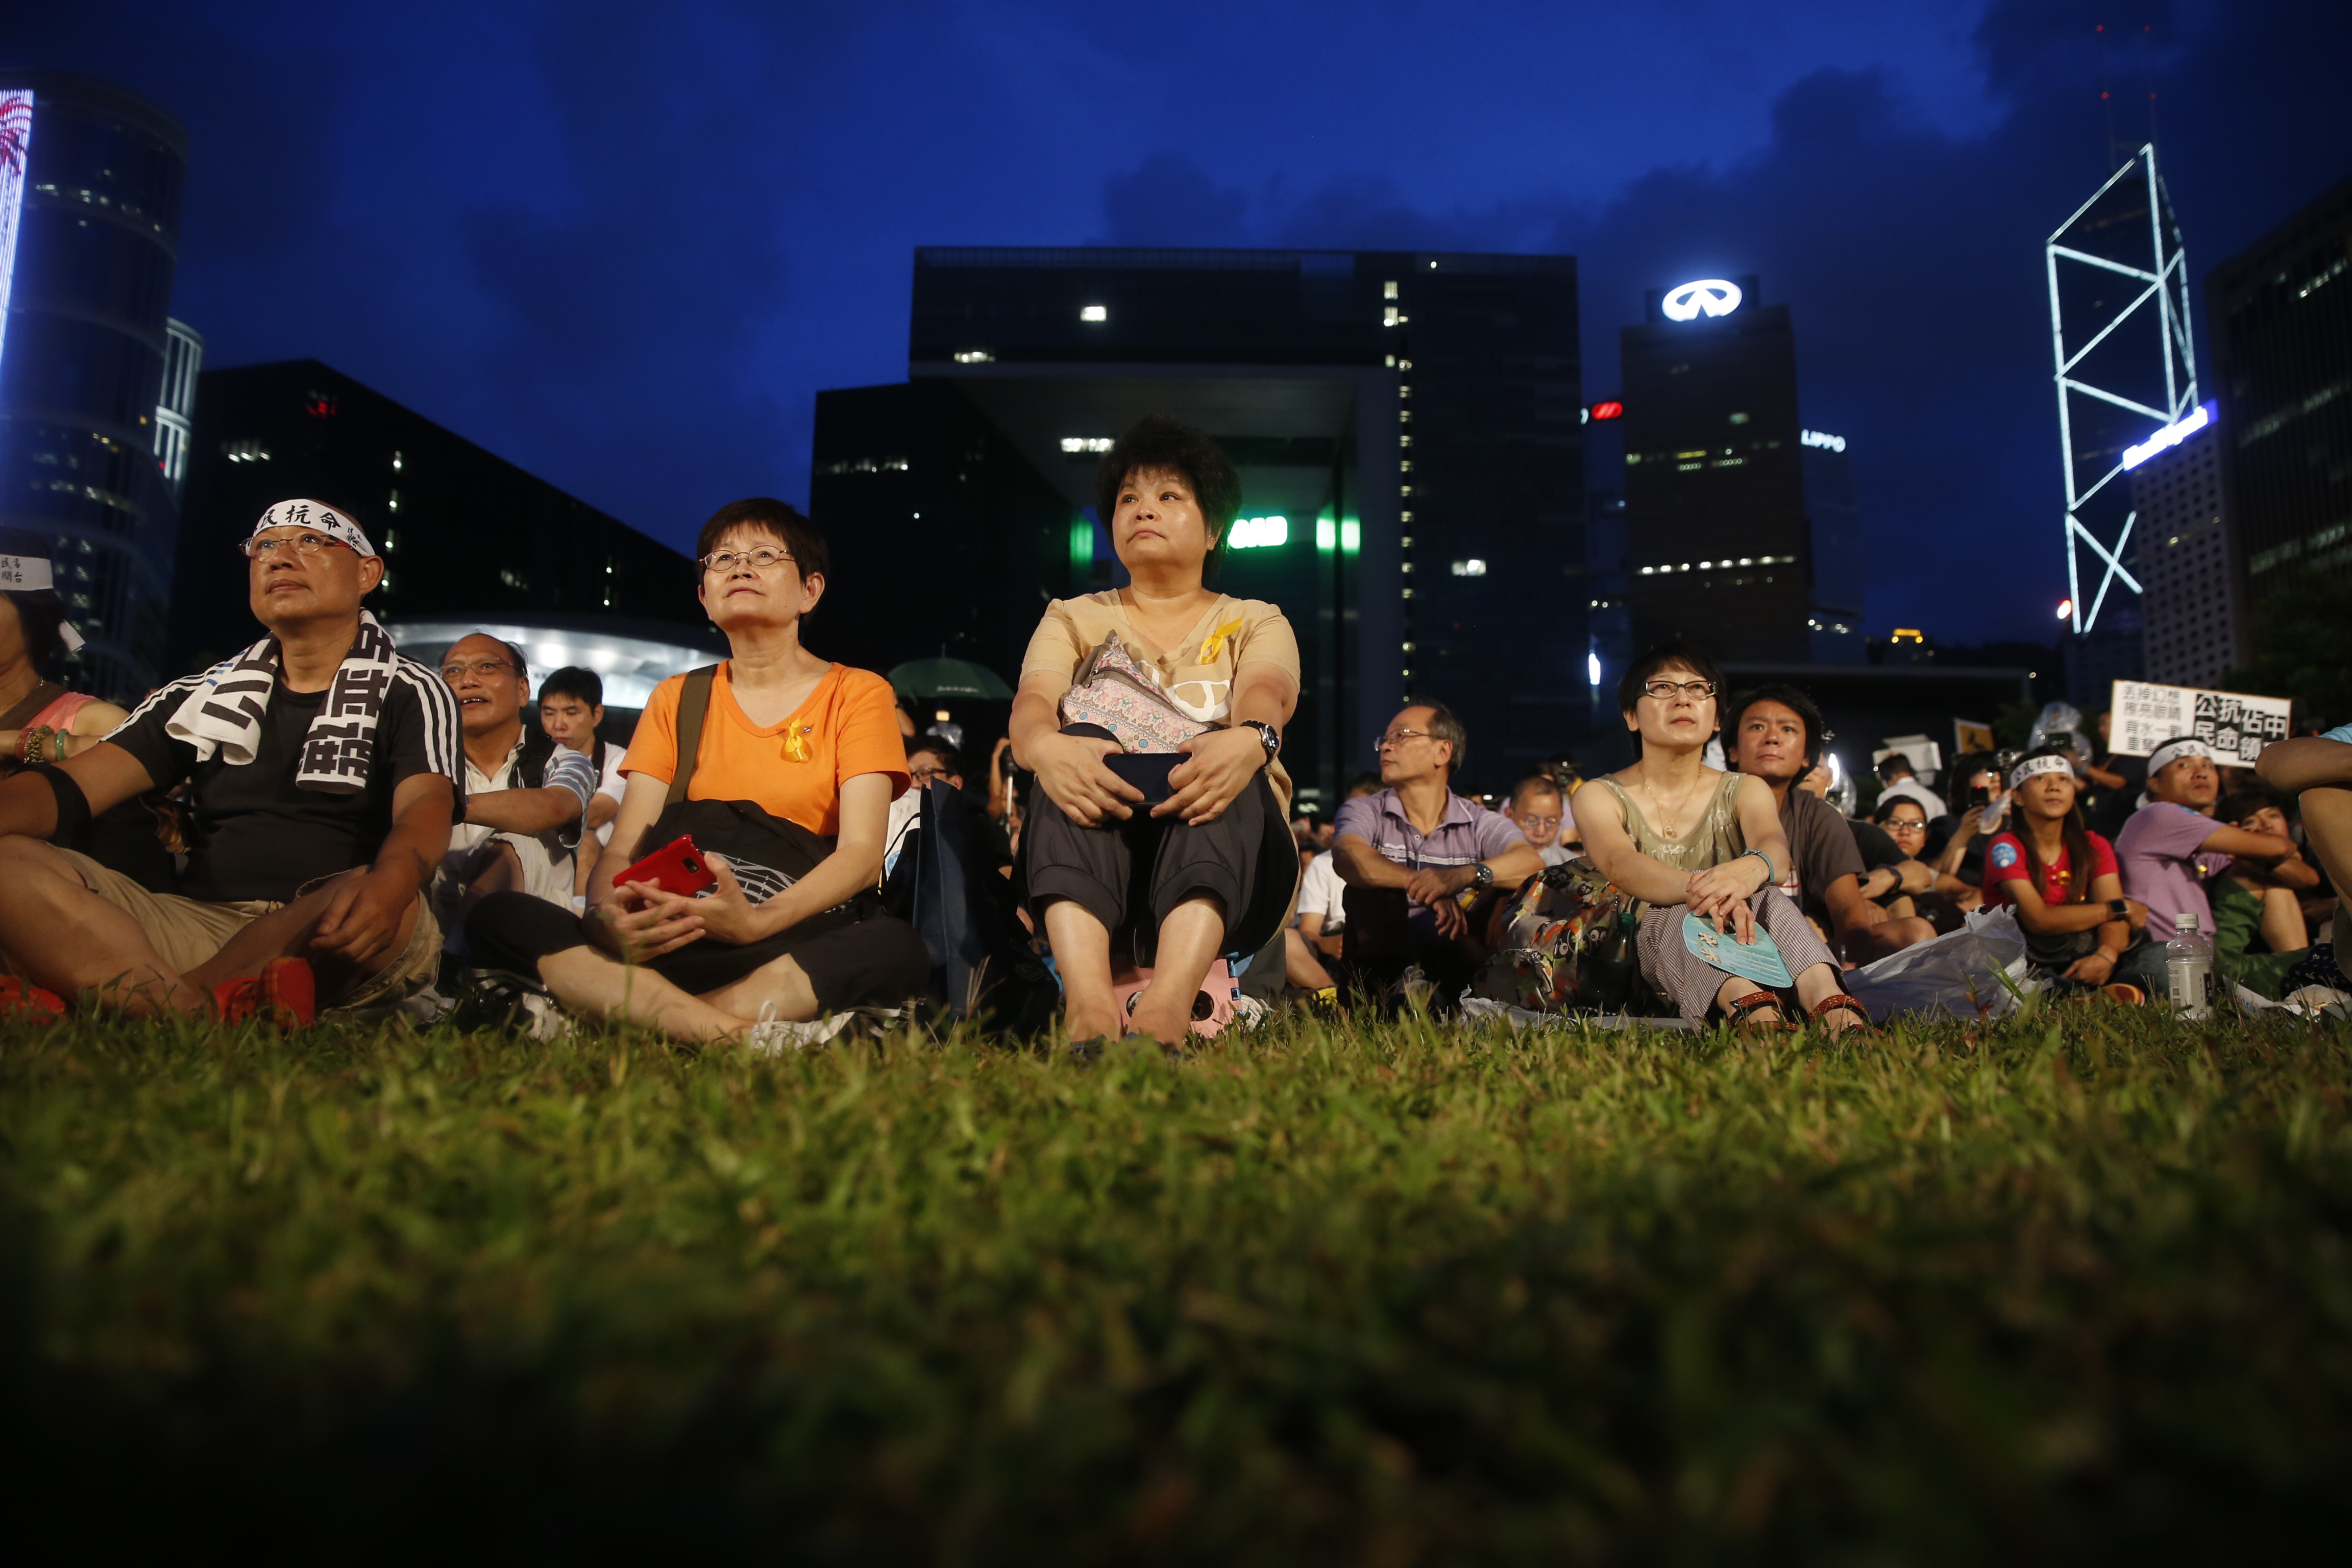 Pro-democracy activists gather during a rally organized by activist group Occupy Central With Love and Peace (OCLP) outside the offices of Chief Executive Leung Chun-ying in Hong Kong, China, on Sunday, Aug. 31, 2014. (Bloomberg—Bloomberg via Getty Images)